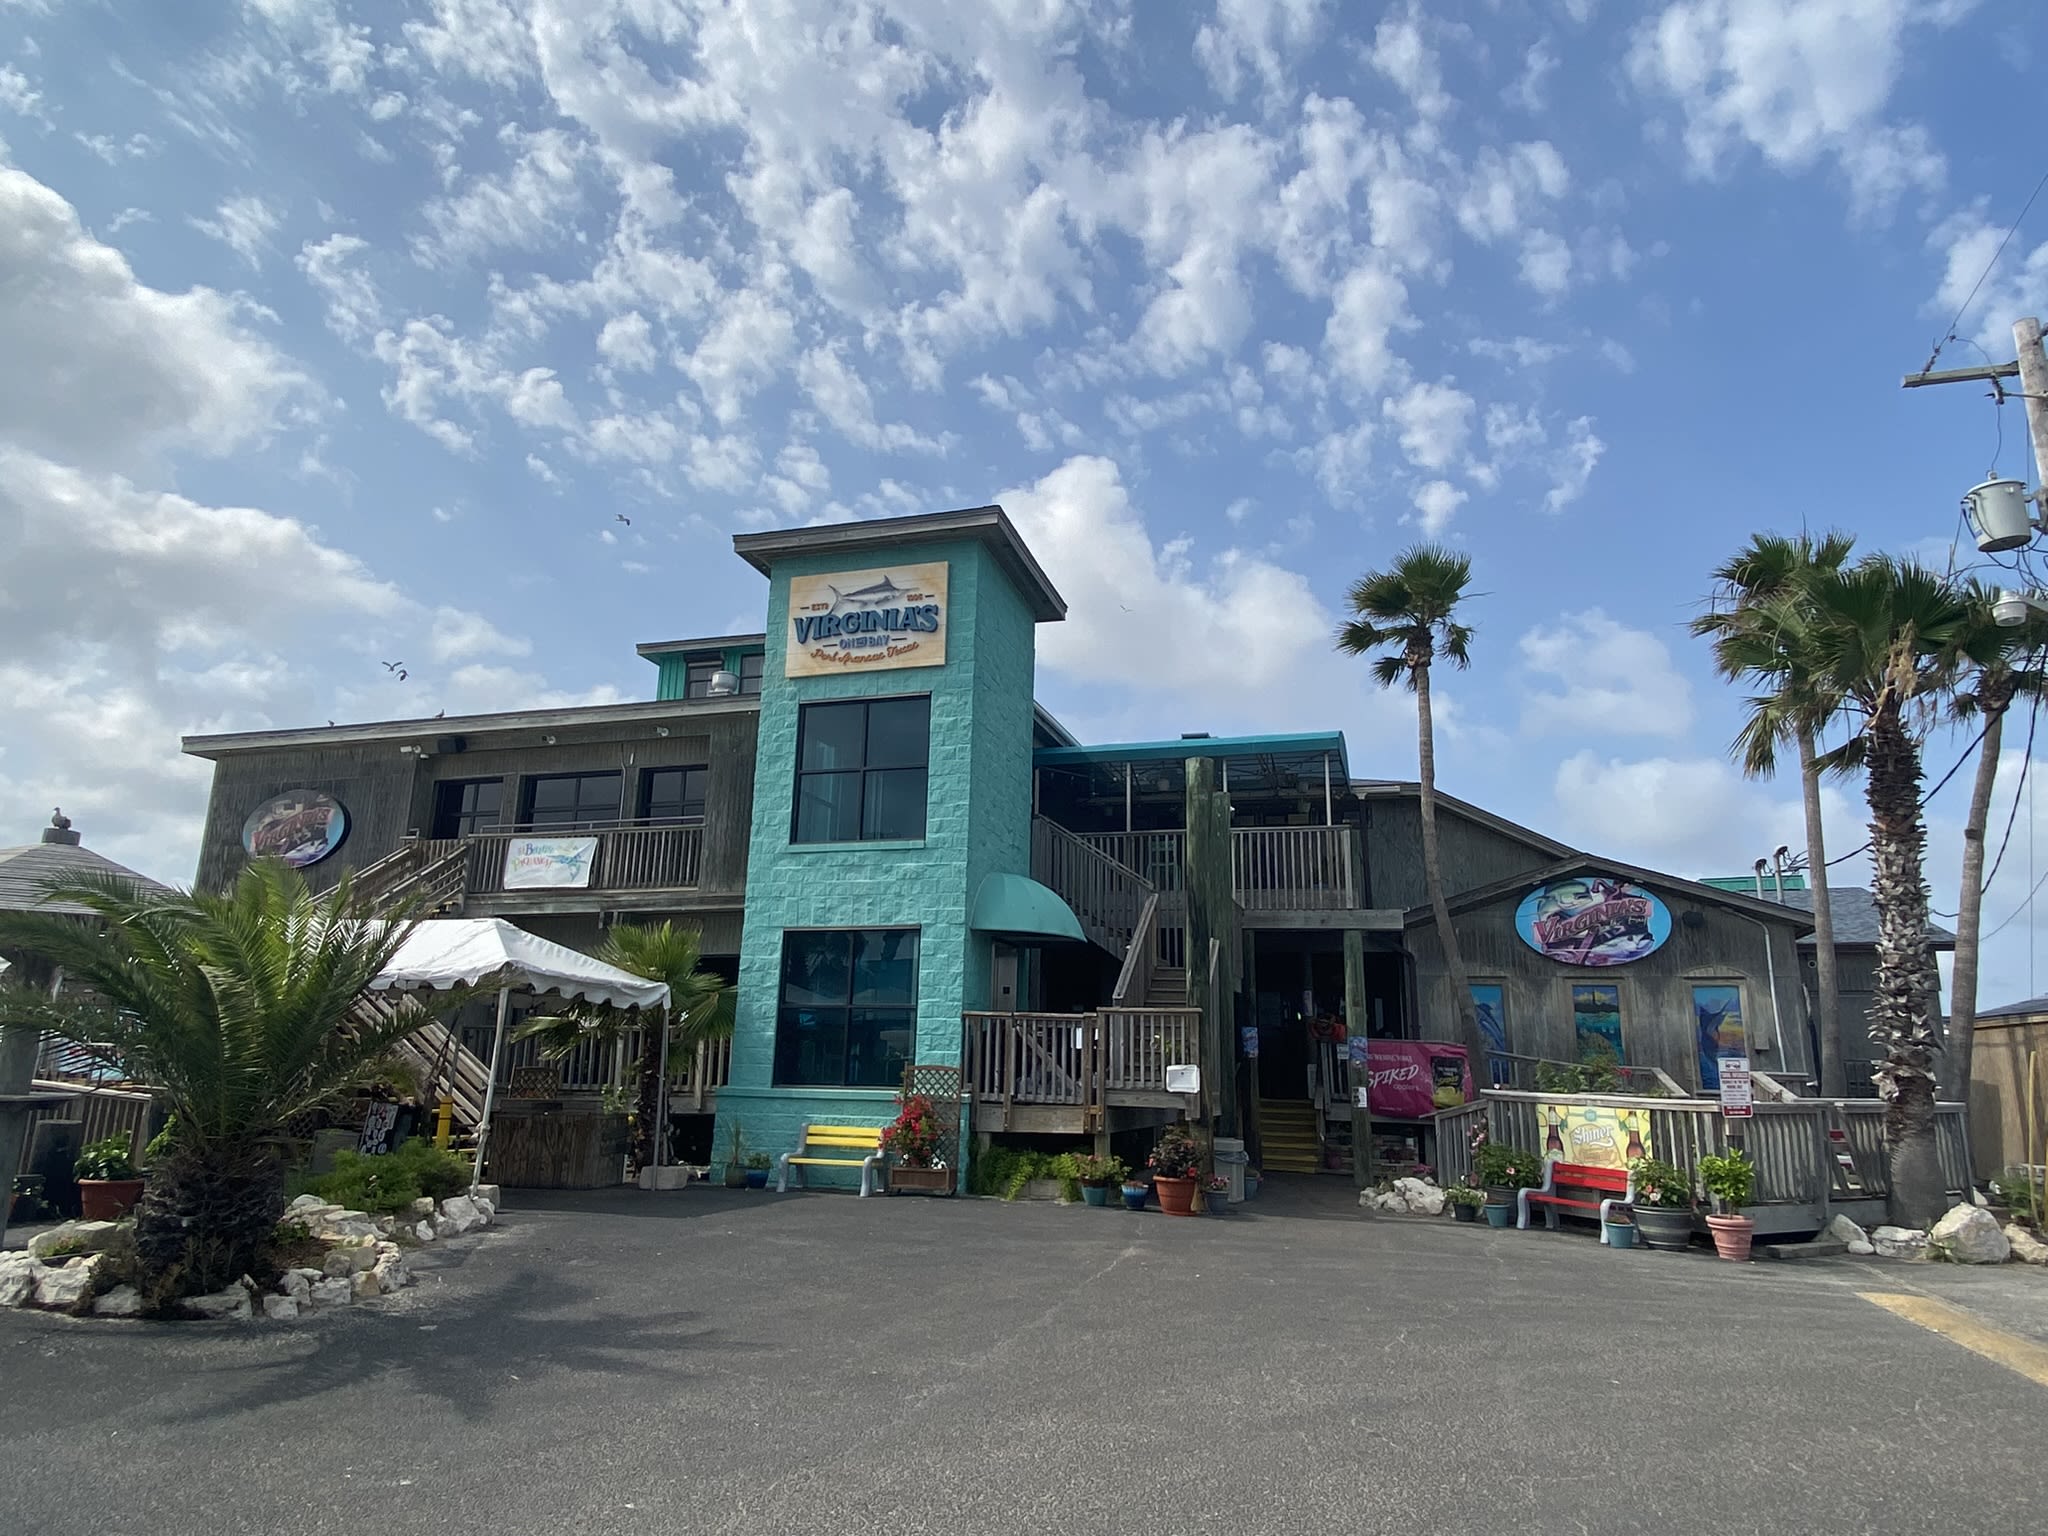 8 best restaurants and bars for the perfect Port Aransas vacation